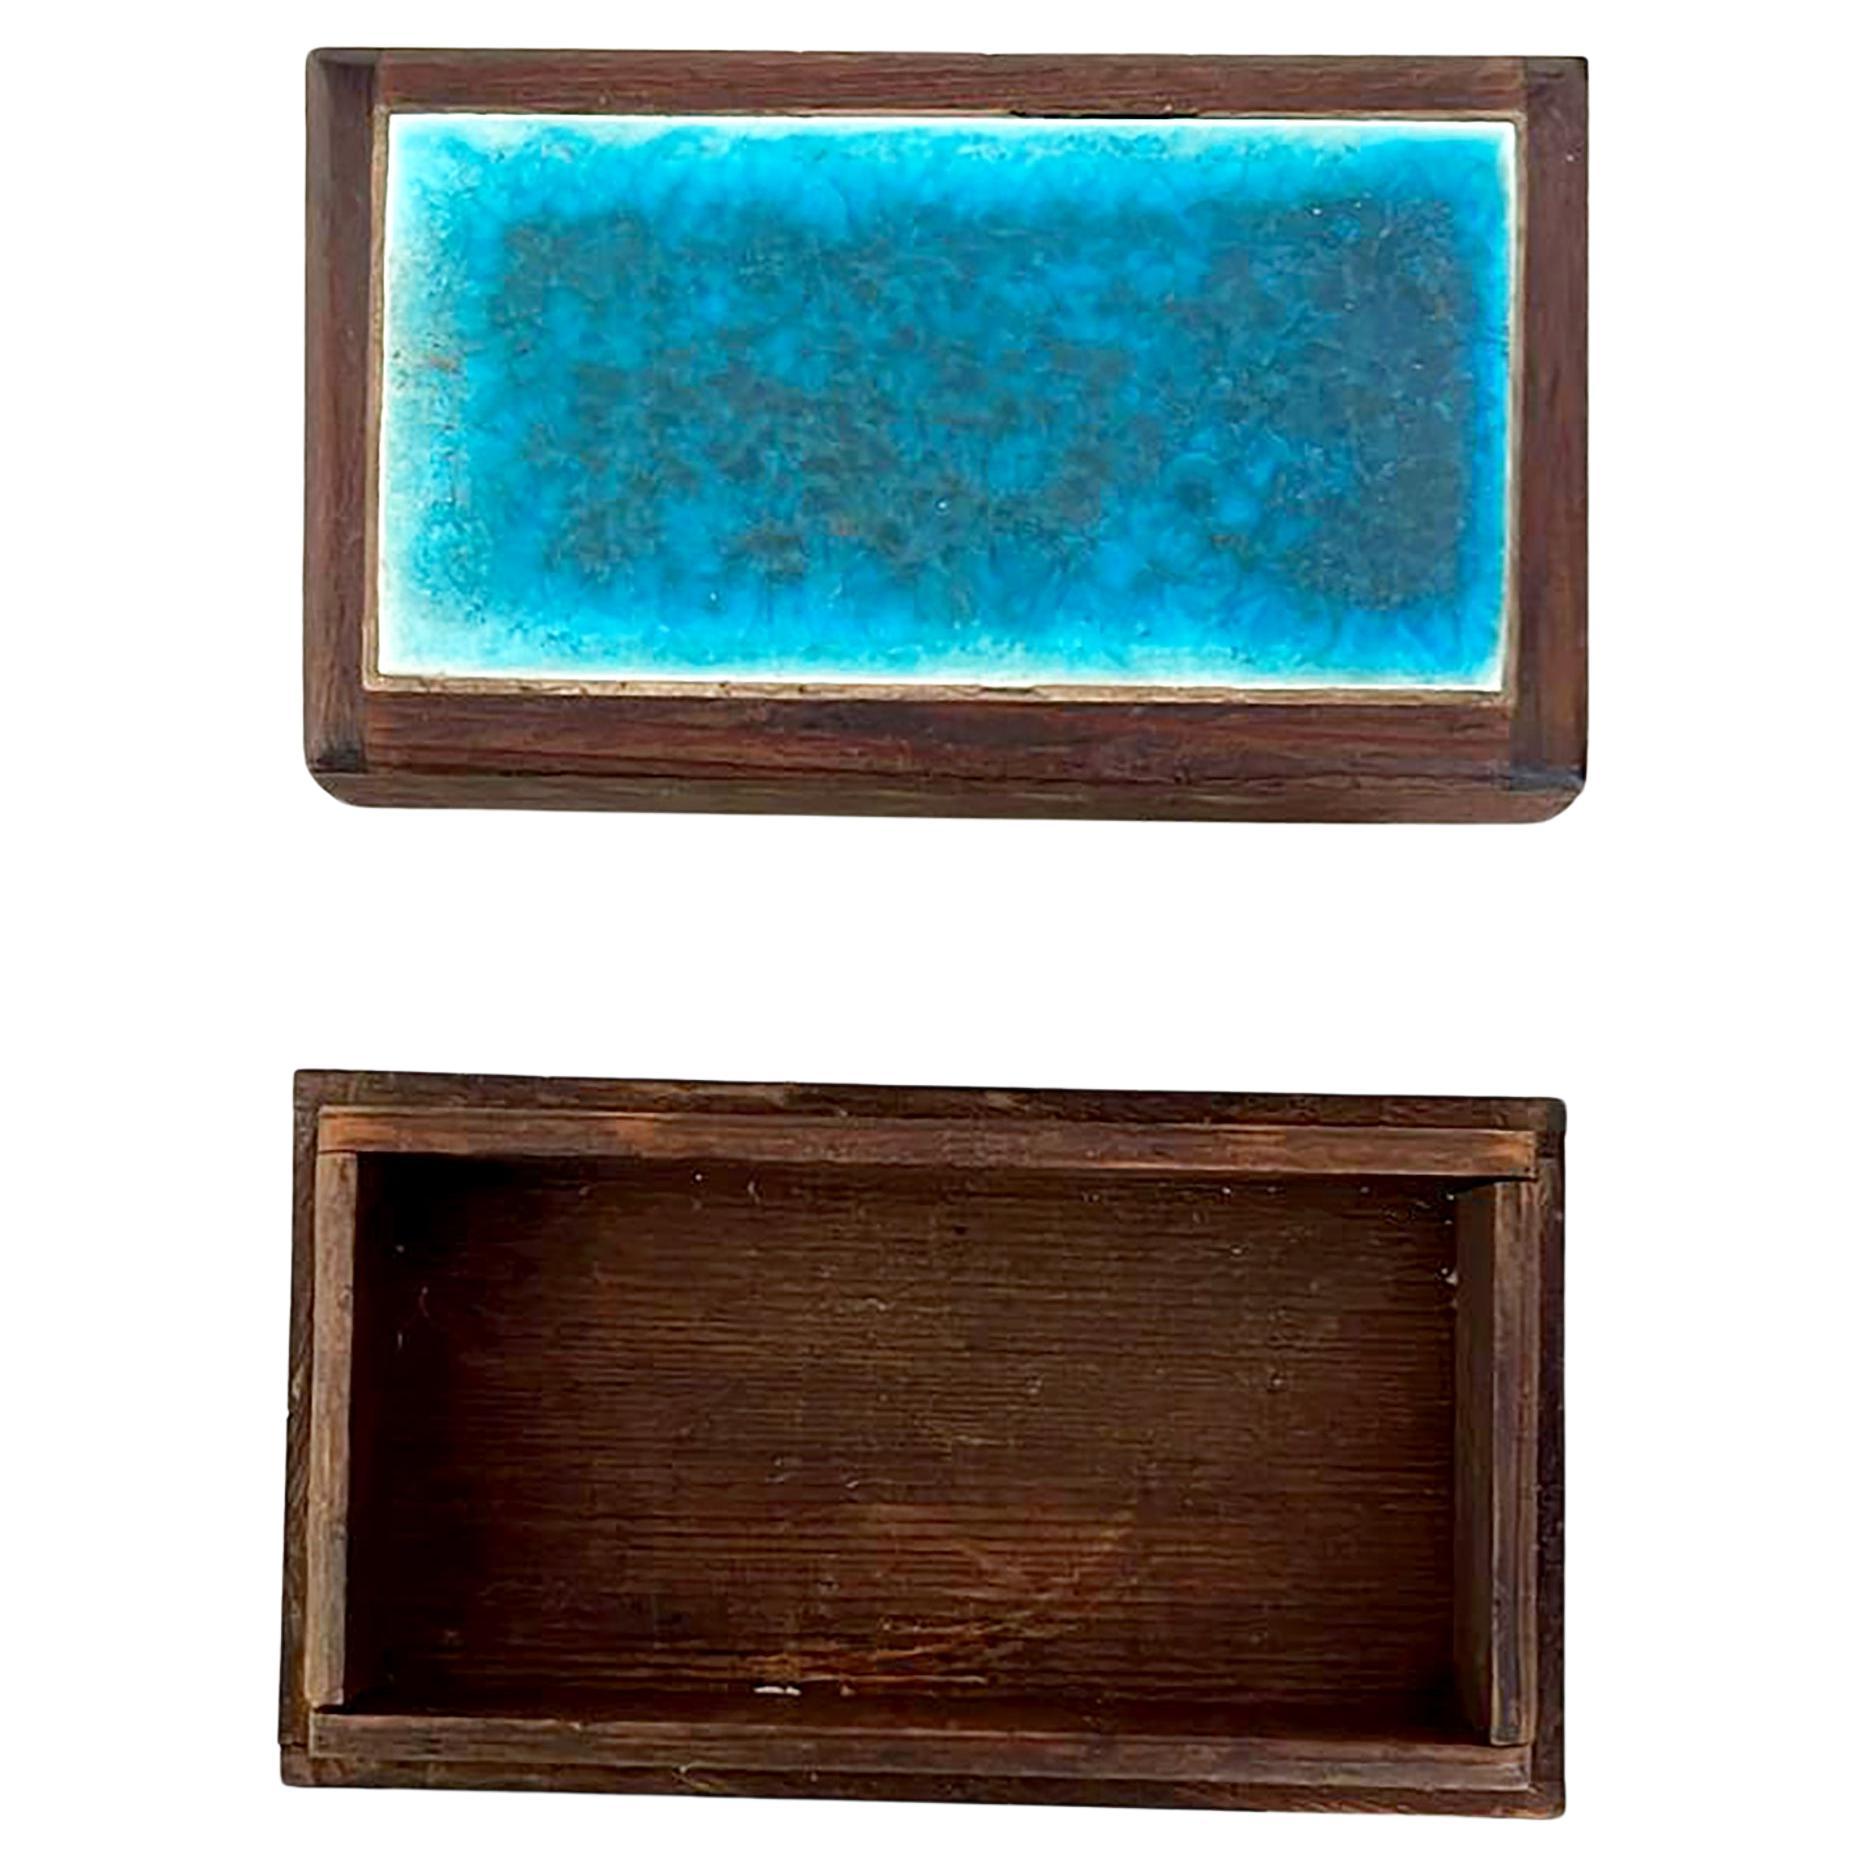 Glazed Doyle Lane Blue Craquelure Tile Set in Hand Made Rosewood Box  For Sale